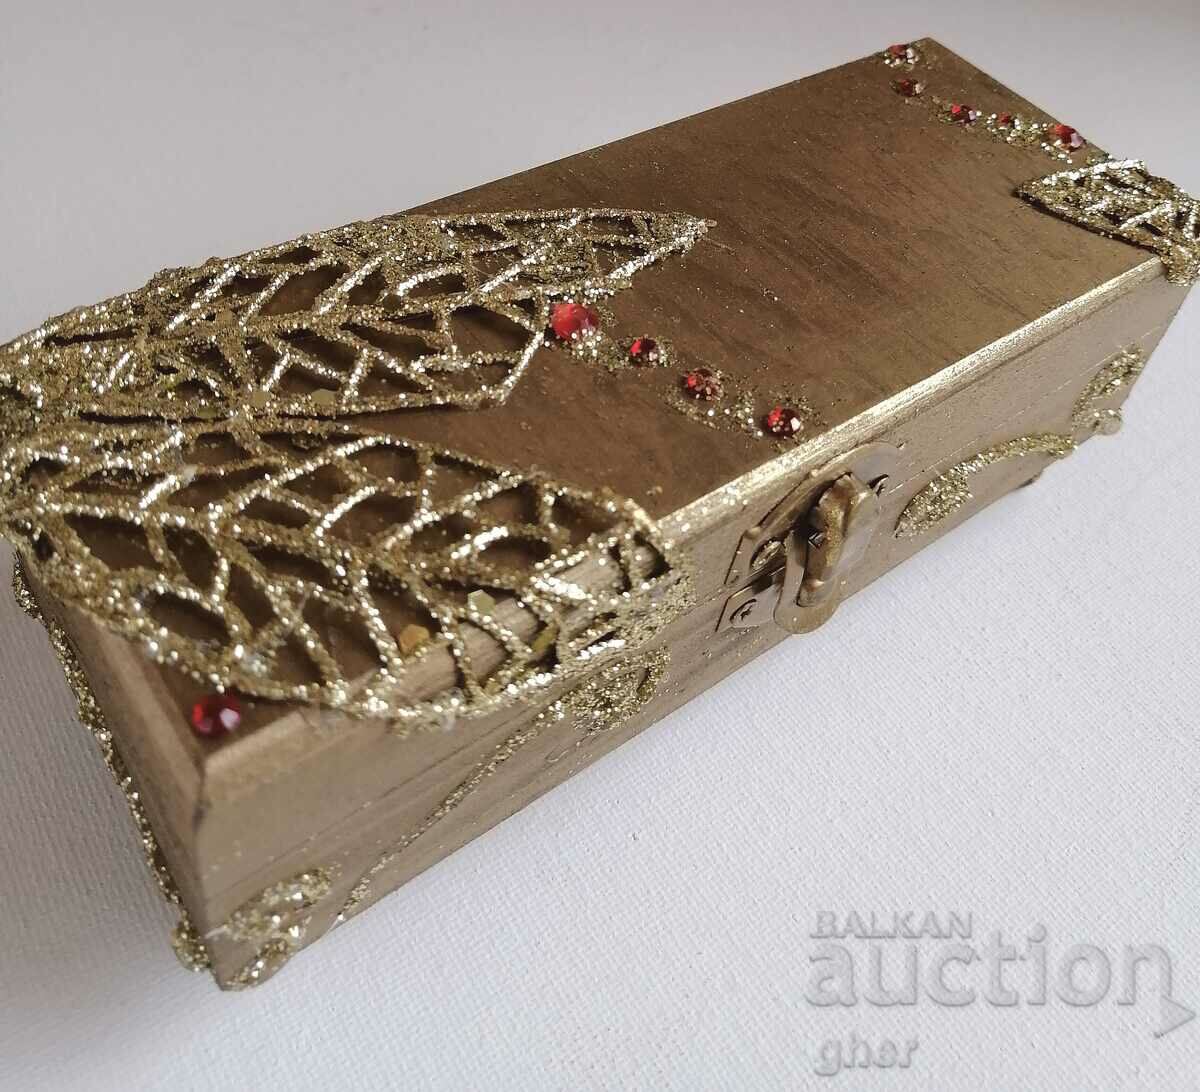 Gilded wooden jewelry box with gilded ornaments.